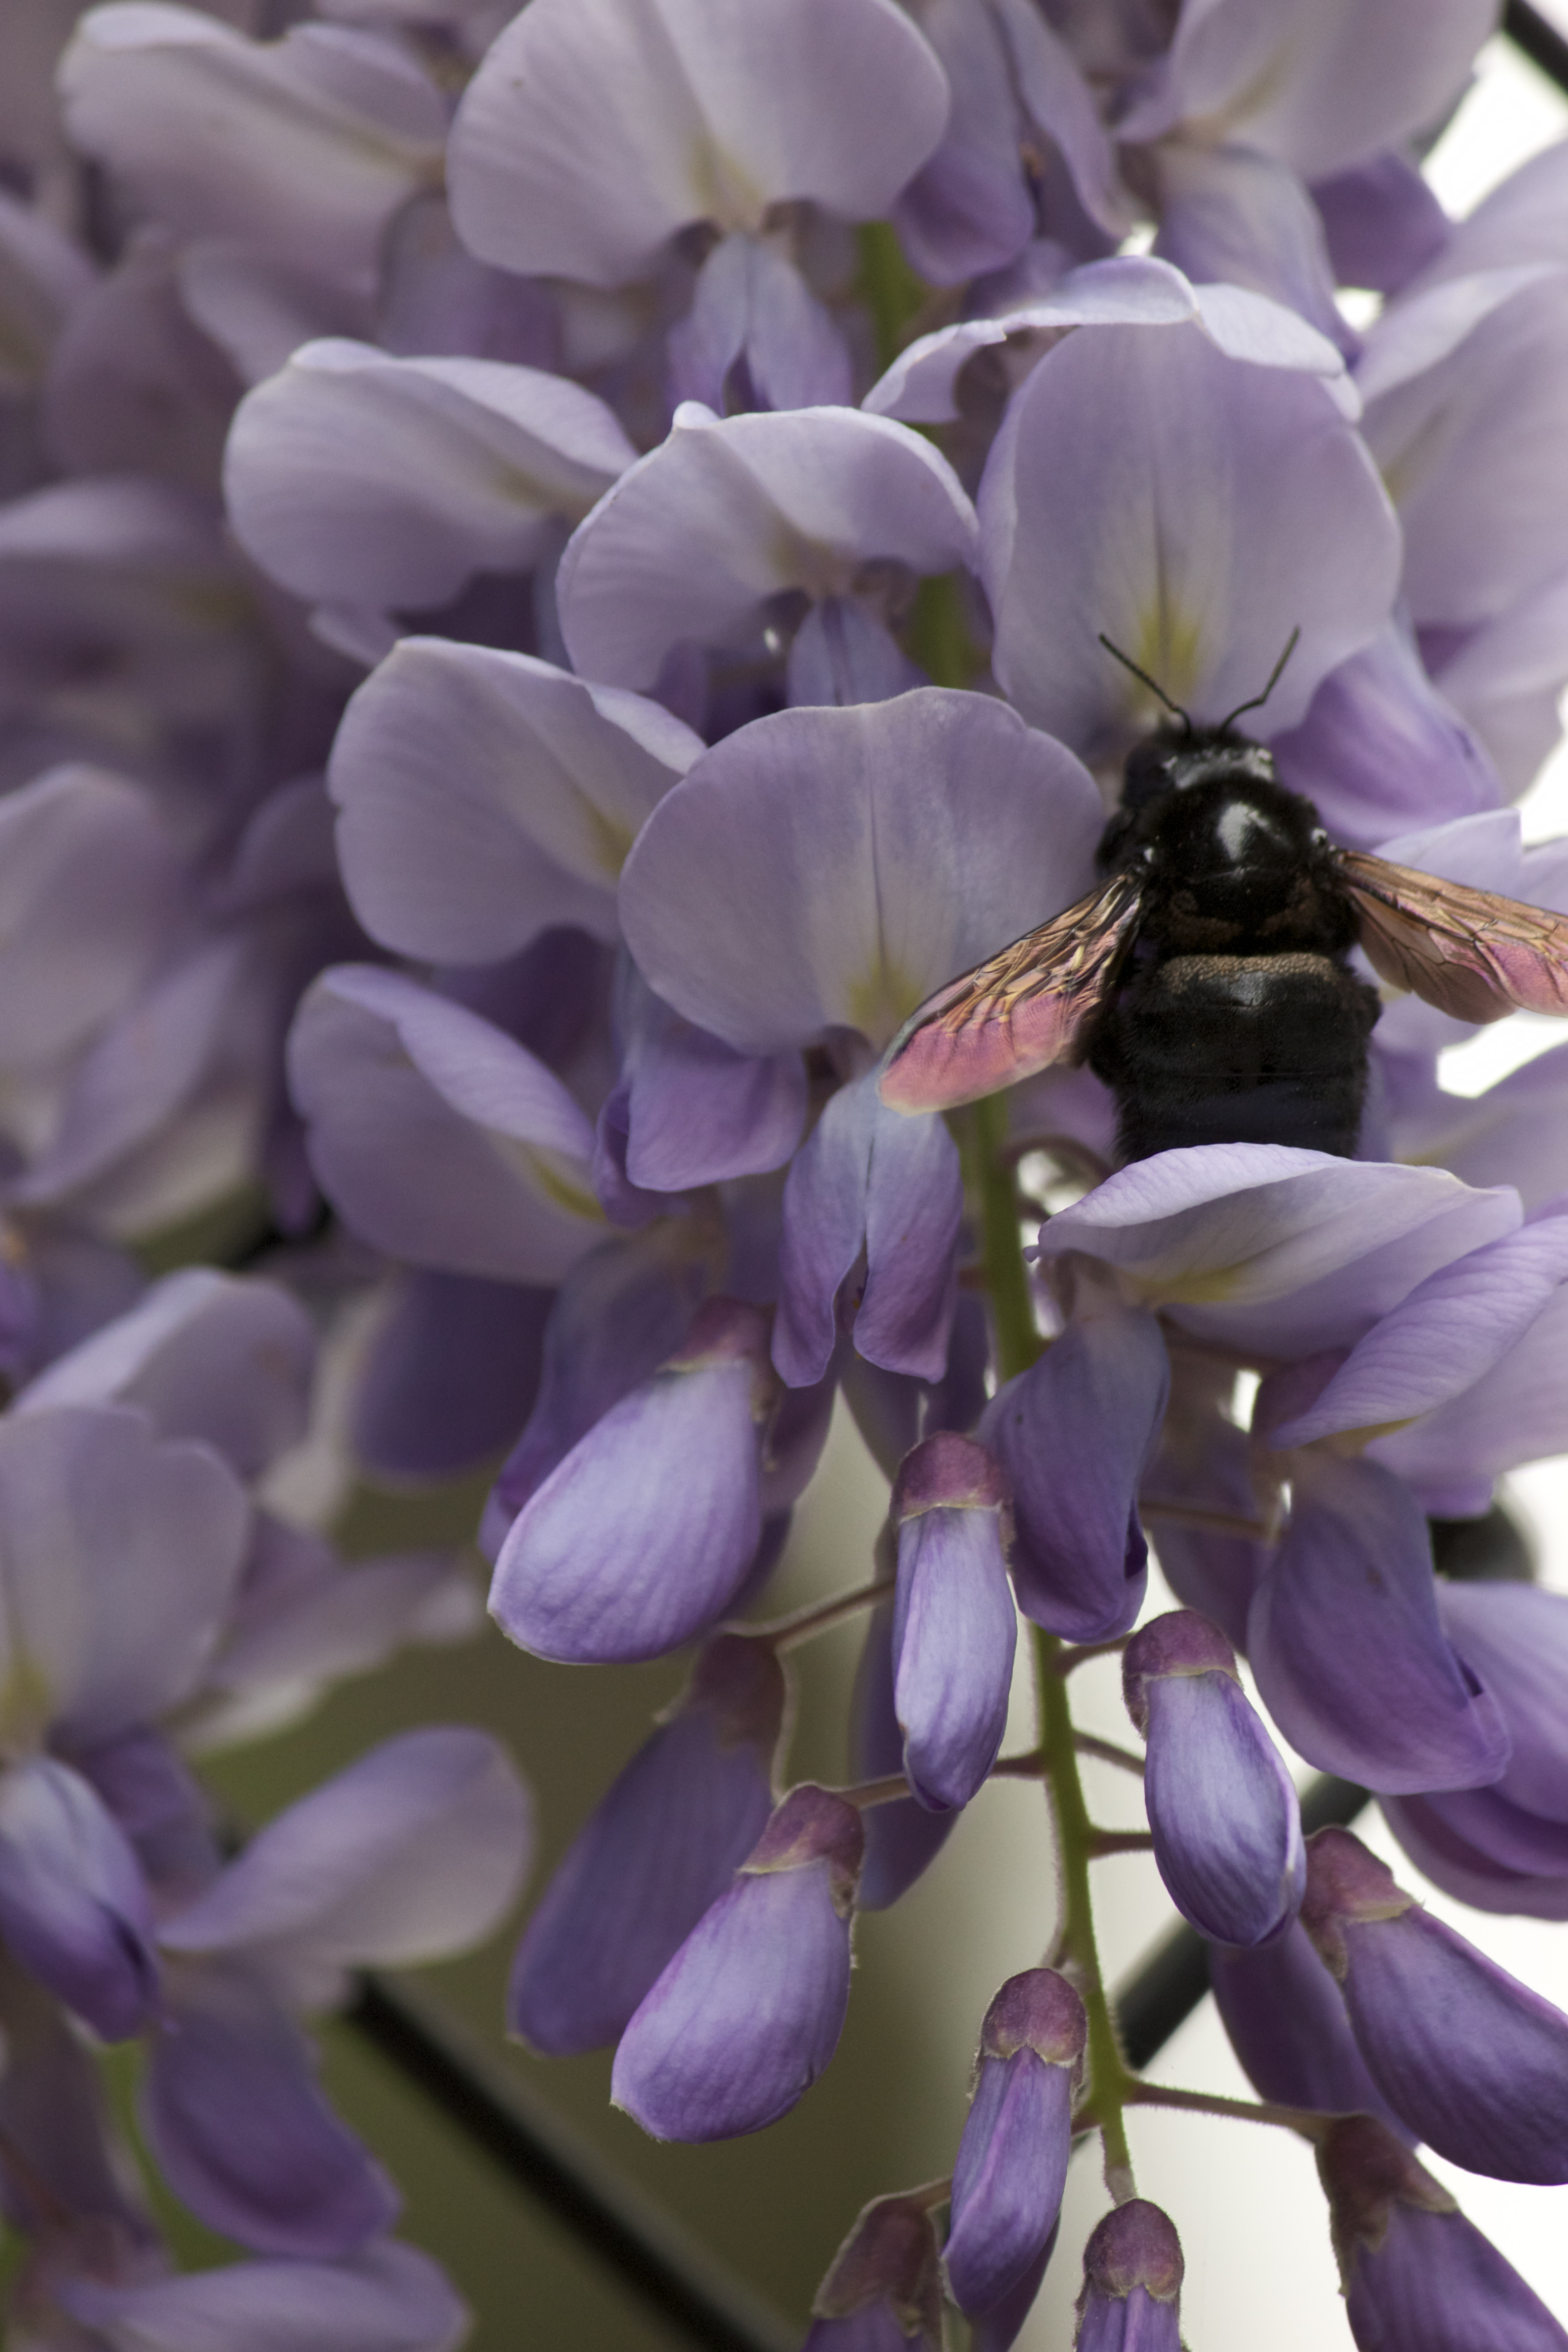 Closeup of a black carpenter bee with iridescent wings on purple wisteria flowers.